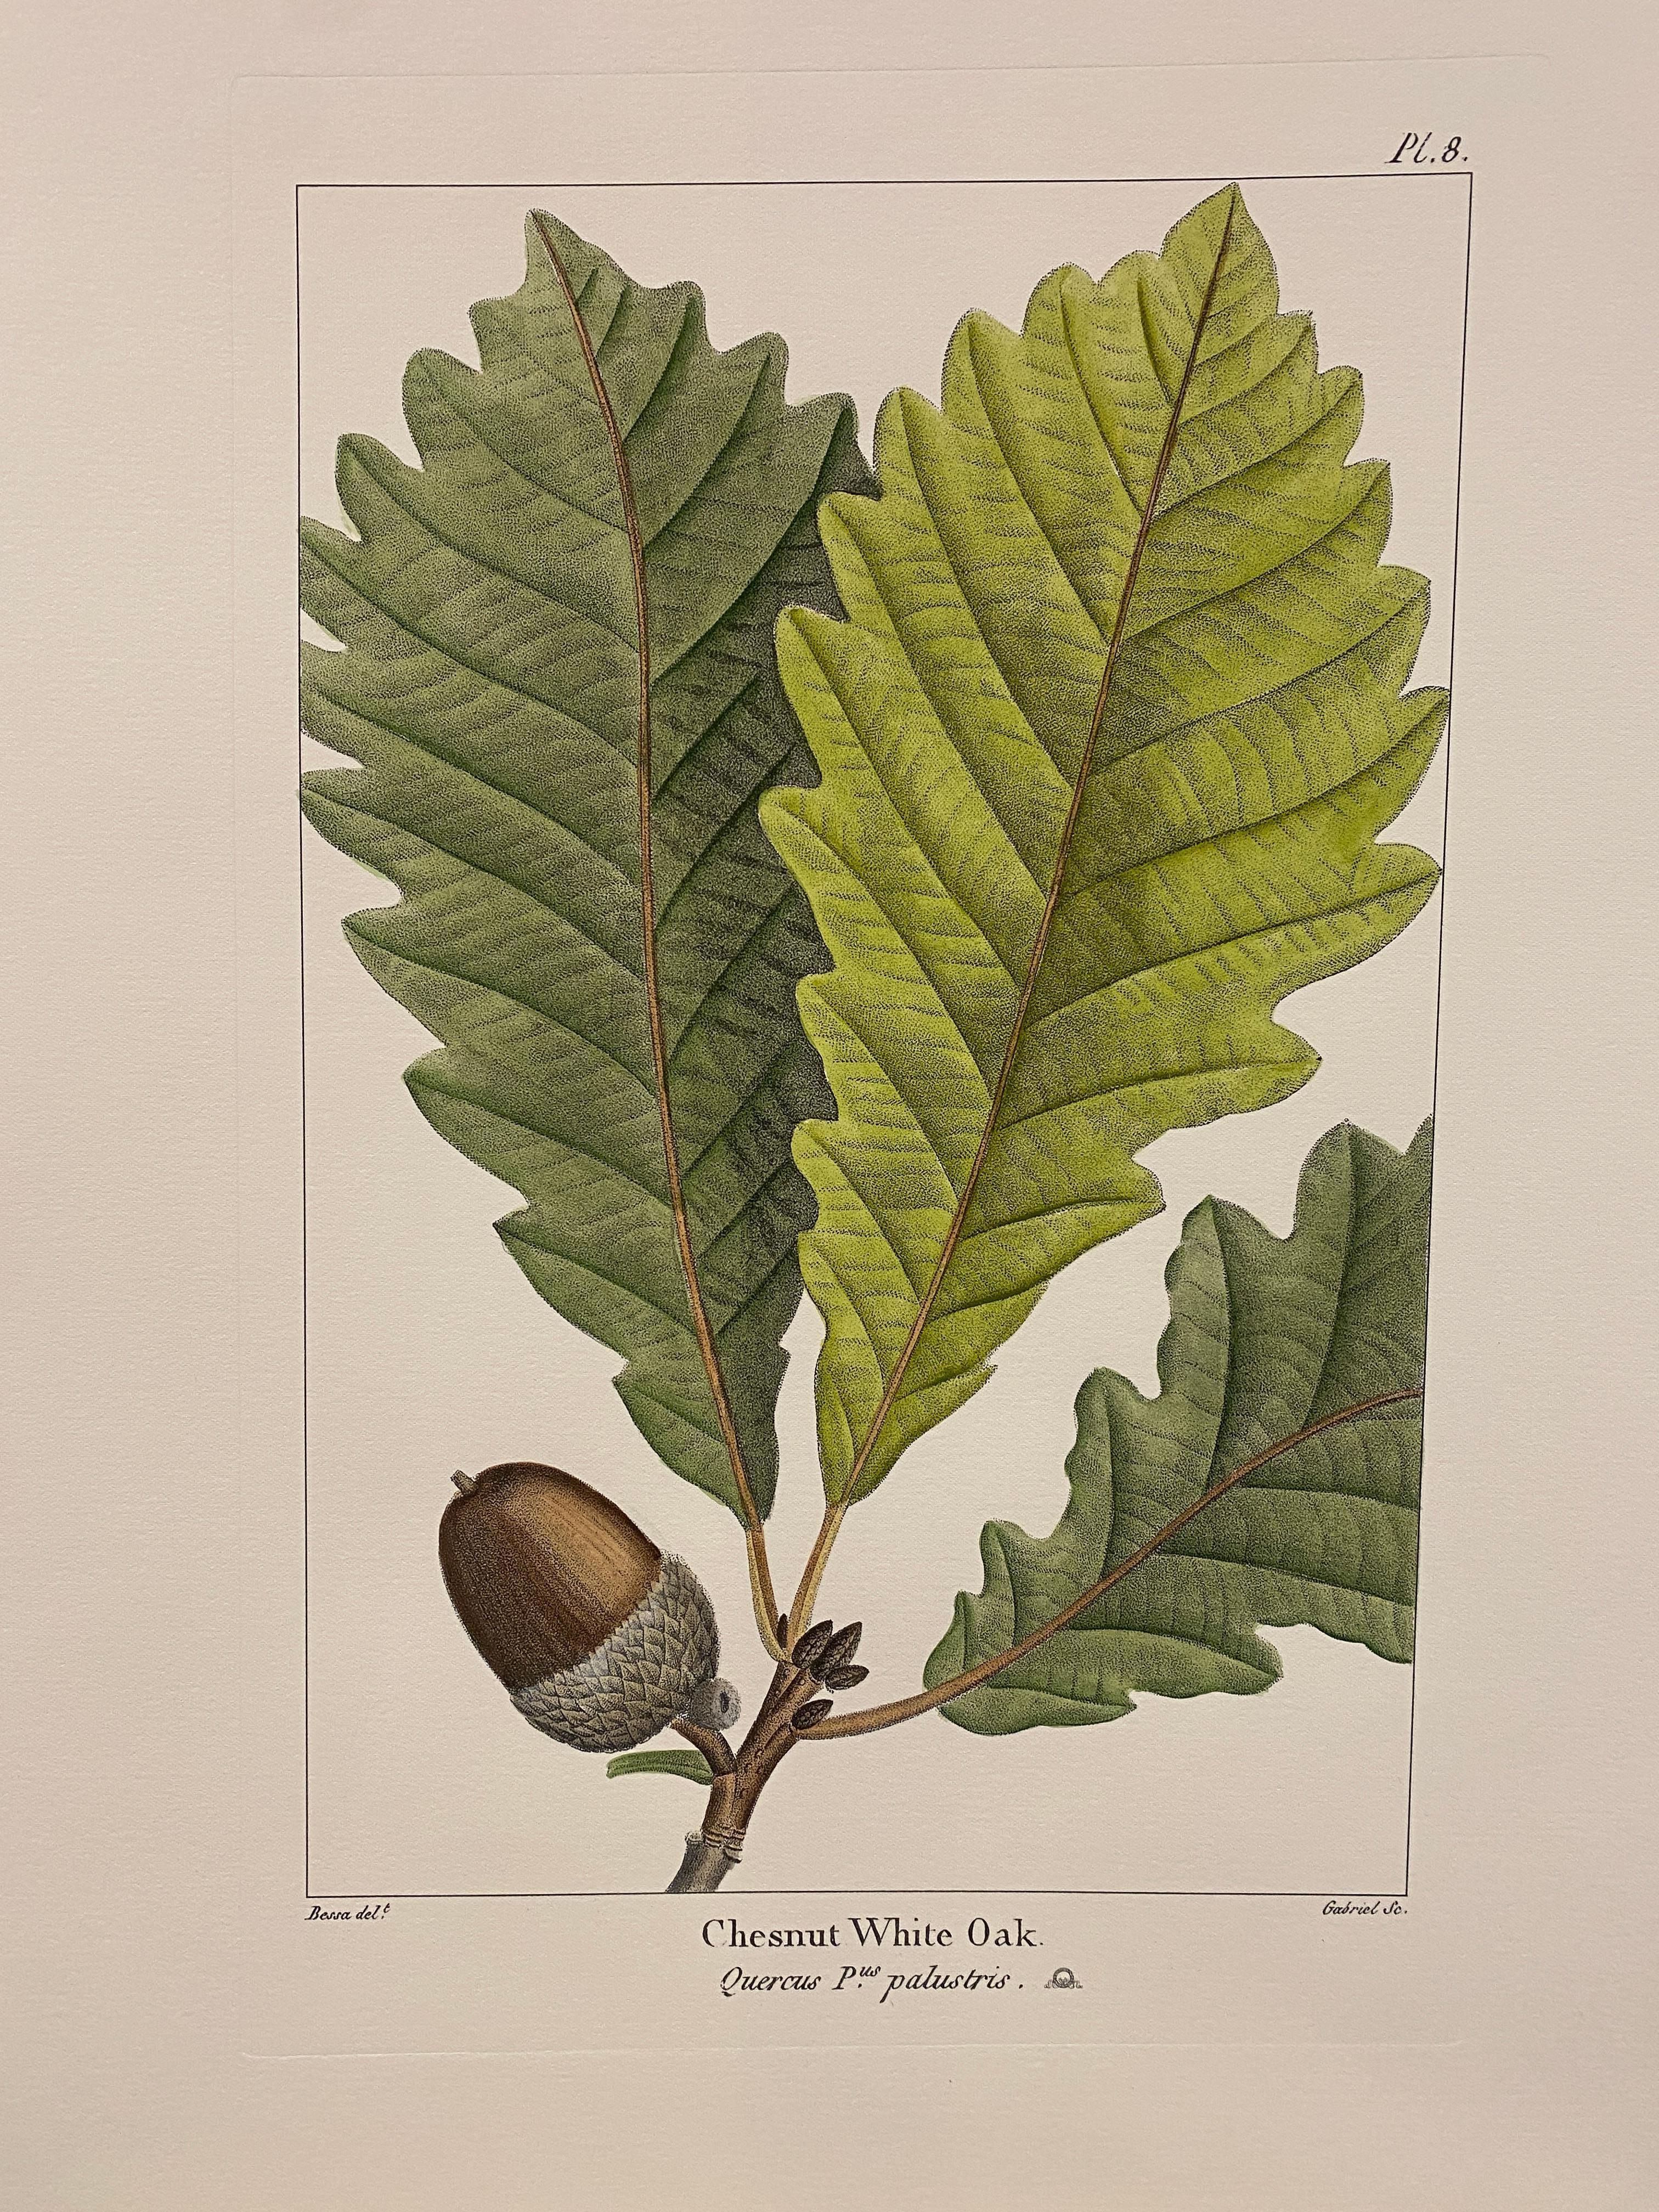 Print from the Collection Botanique Trees representing Chesnut White Oak, enriched with green and browm colors and nuances of watercolor, to make it more realistic.

Another different Bulbacee flowers prints are available to create a colourful